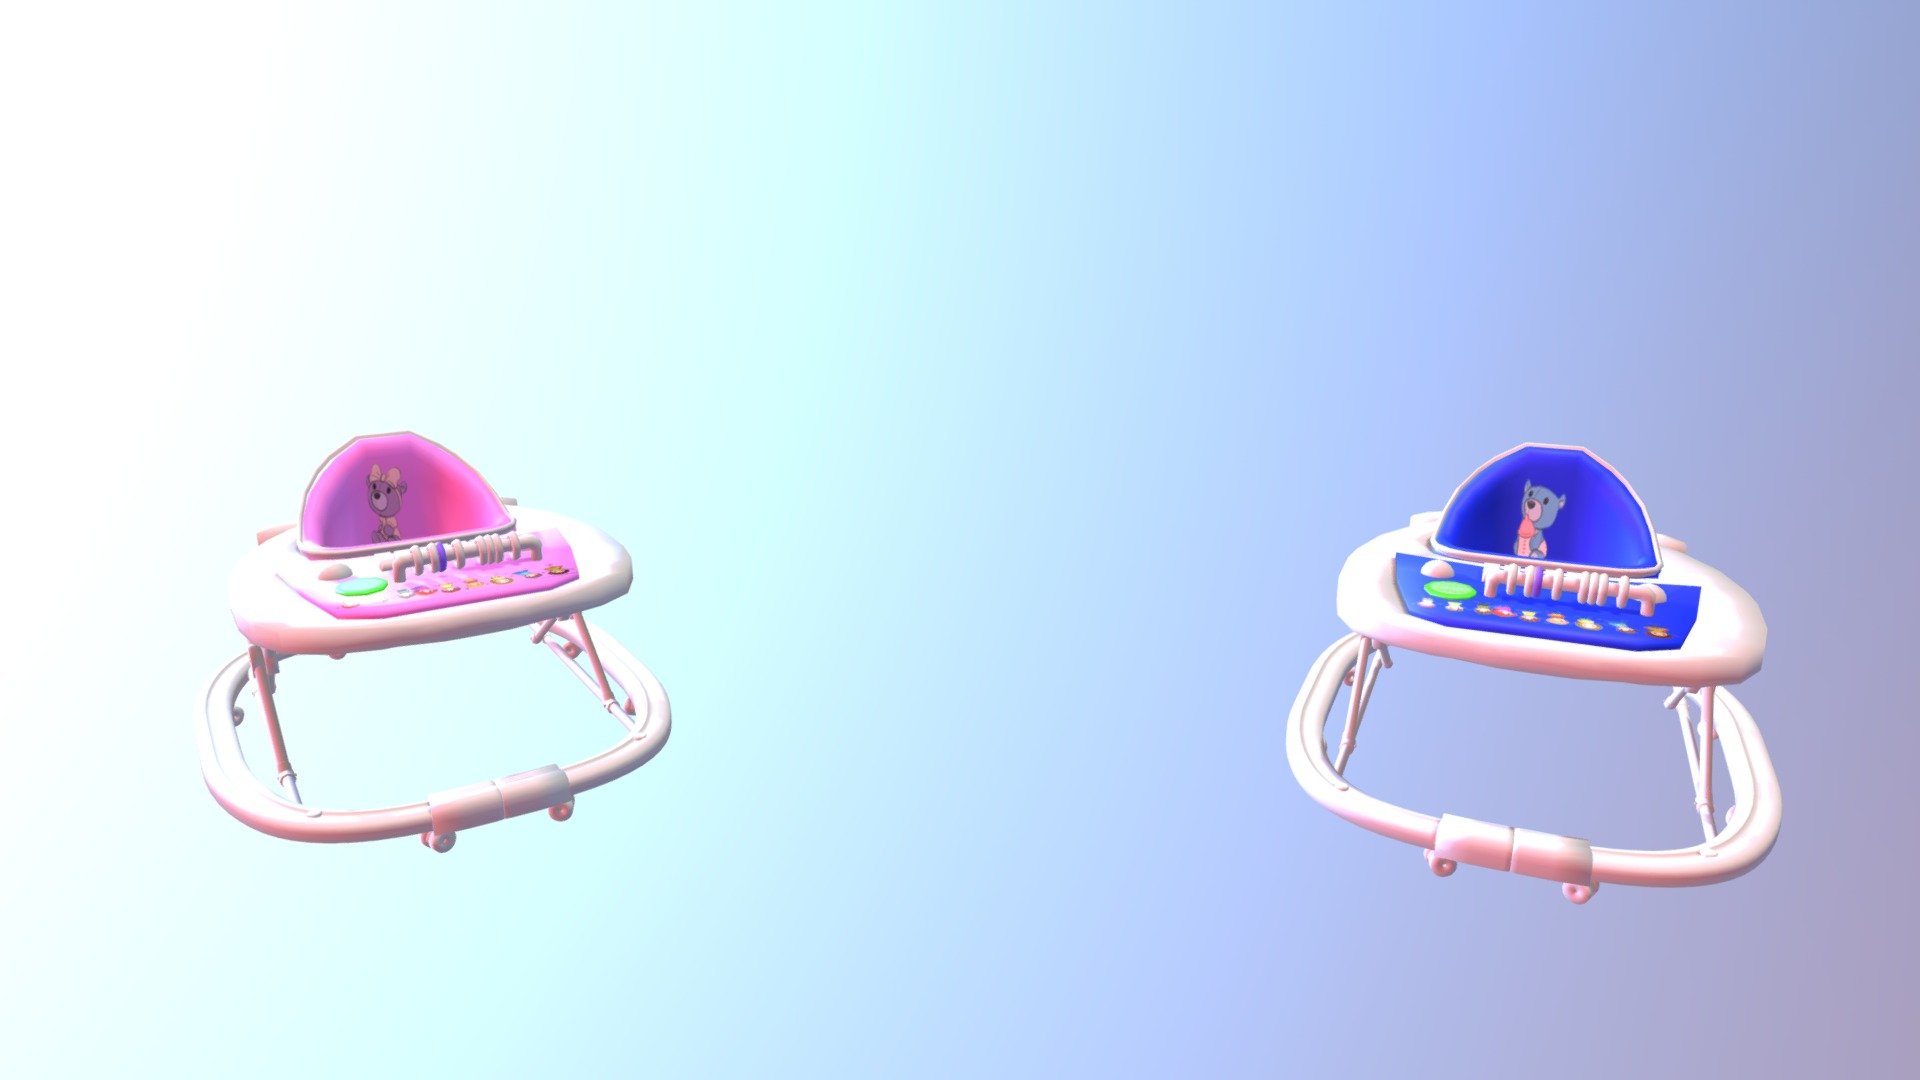 High Speed Baby Walkers

These Baby Walkers Are Meant For.

High Speed Action Race.

Once Equipped to a Baby will be.

Even Faster than walking.

Making baby greed and baby cabela the runners.

But will it be enough to Keep Up - Baby Greed And Baby Cabela Racing Baby Walkers - 3D model by jorgebaby (@jorgebaby160) 3d model